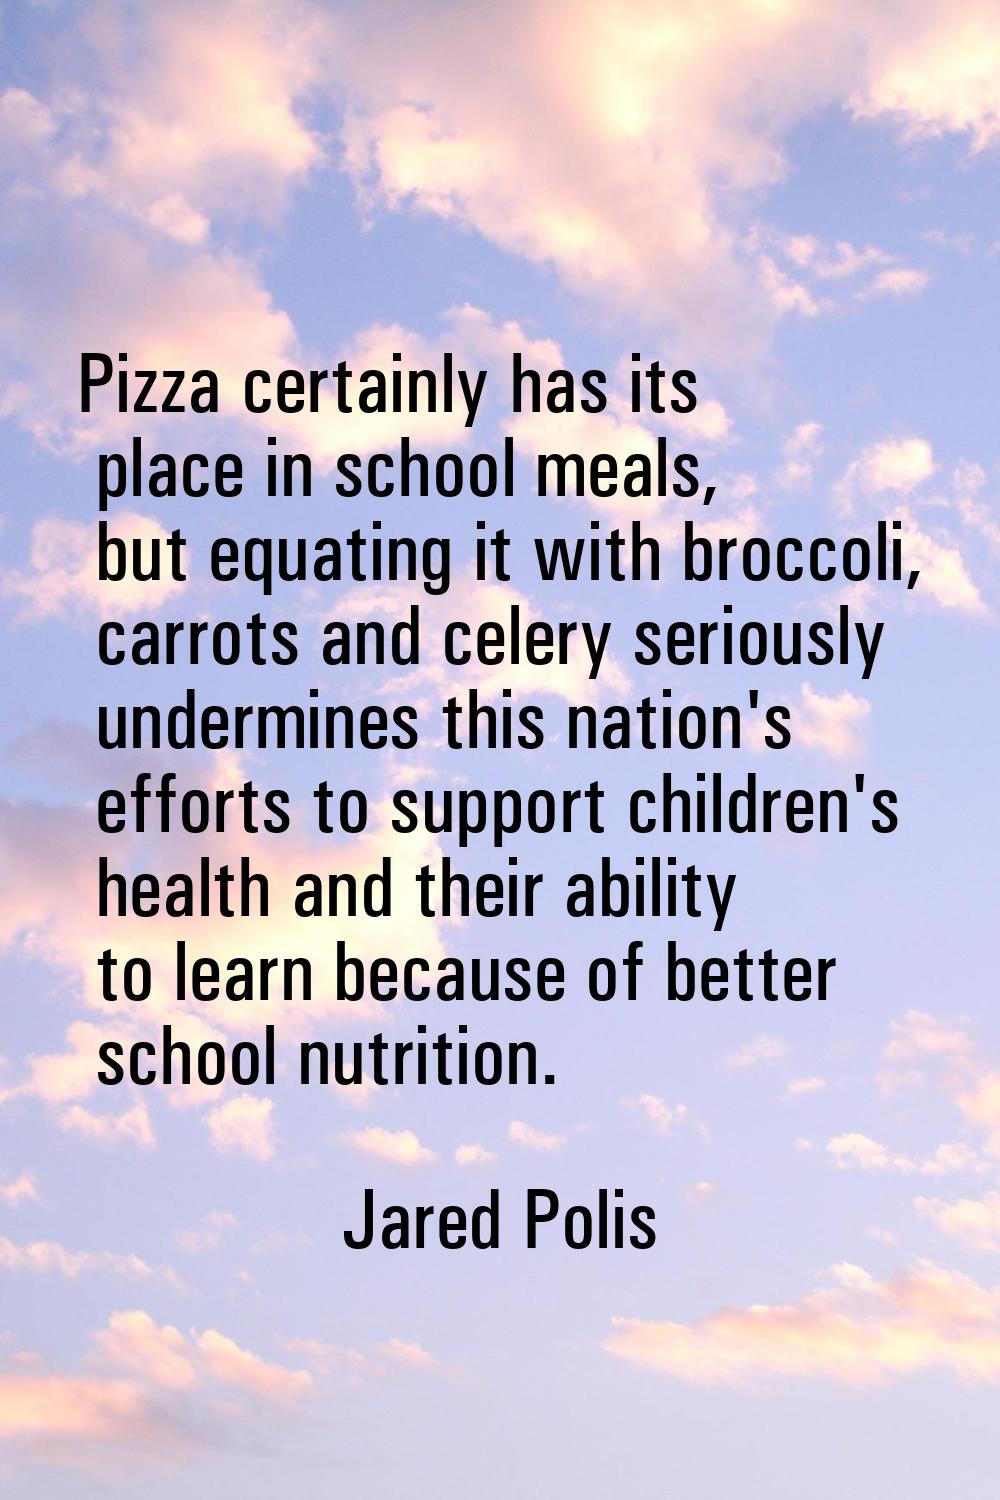 Pizza certainly has its place in school meals, but equating it with broccoli, carrots and celery se